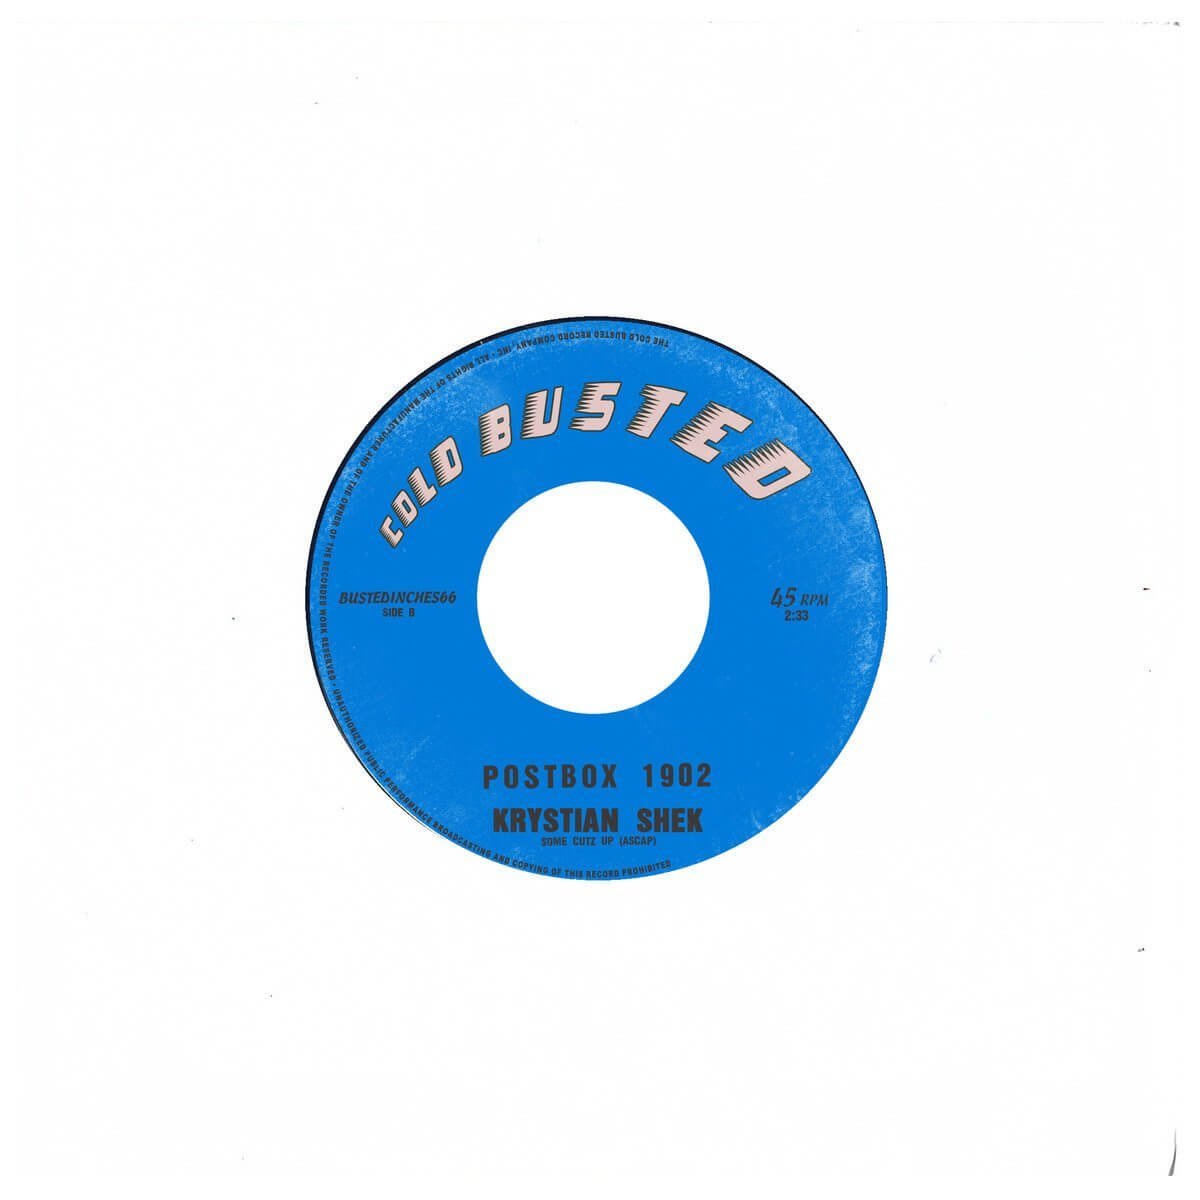 Mister T. & Krystian Shek - Sufi Dance / Postbox 1902 - Limited Edition 7 Inch Vinyl - Cold Busted